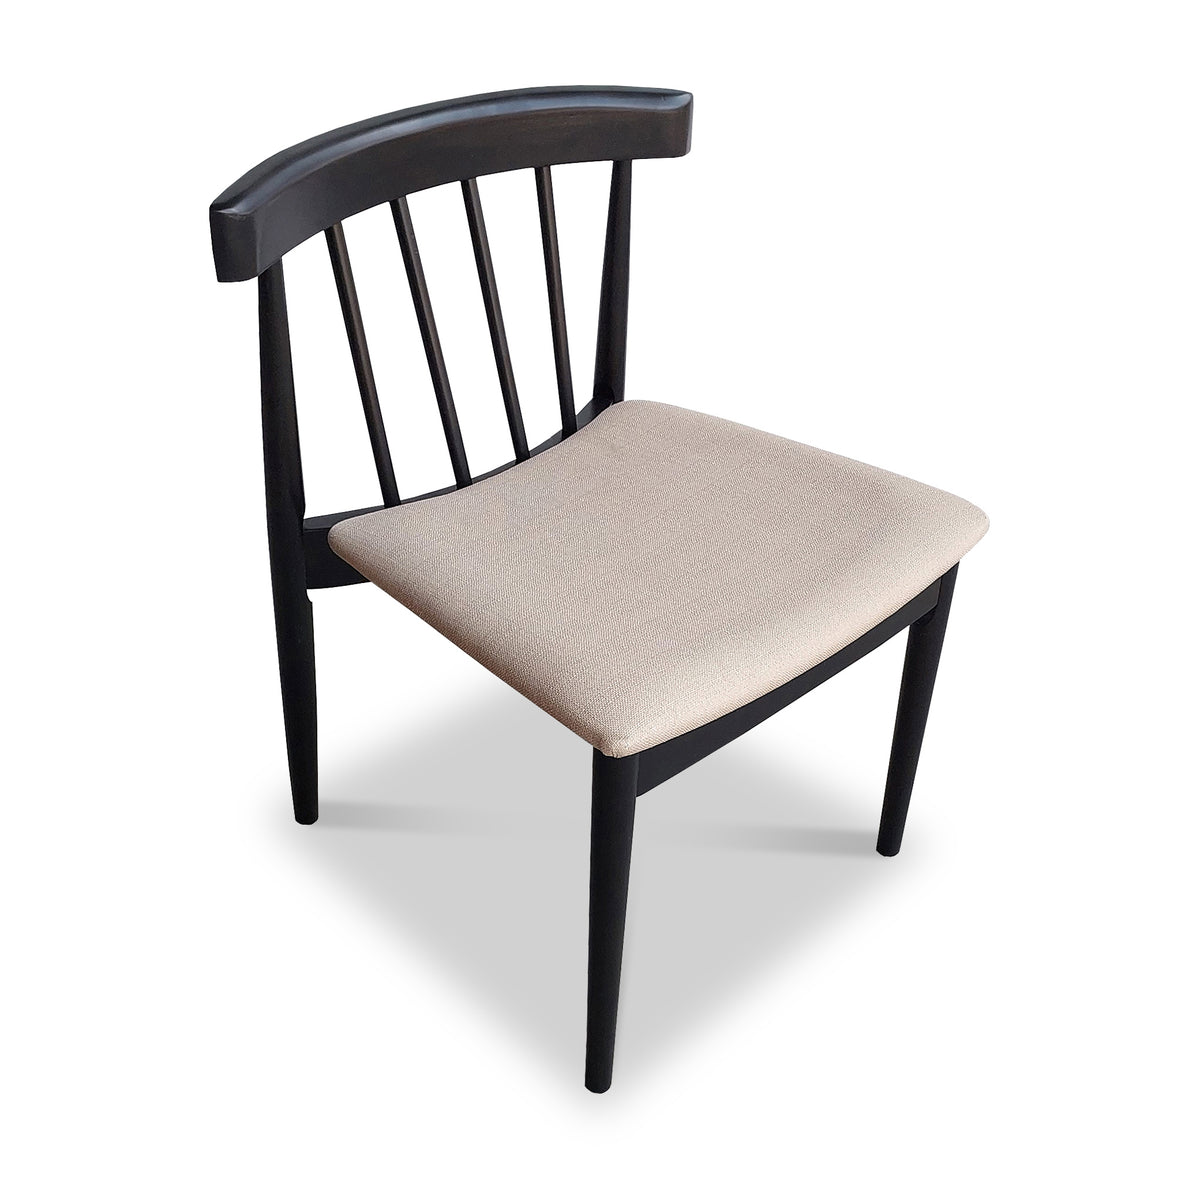 Jackson Dining Chair with Black Frame with beige seat from Roseland Furniture